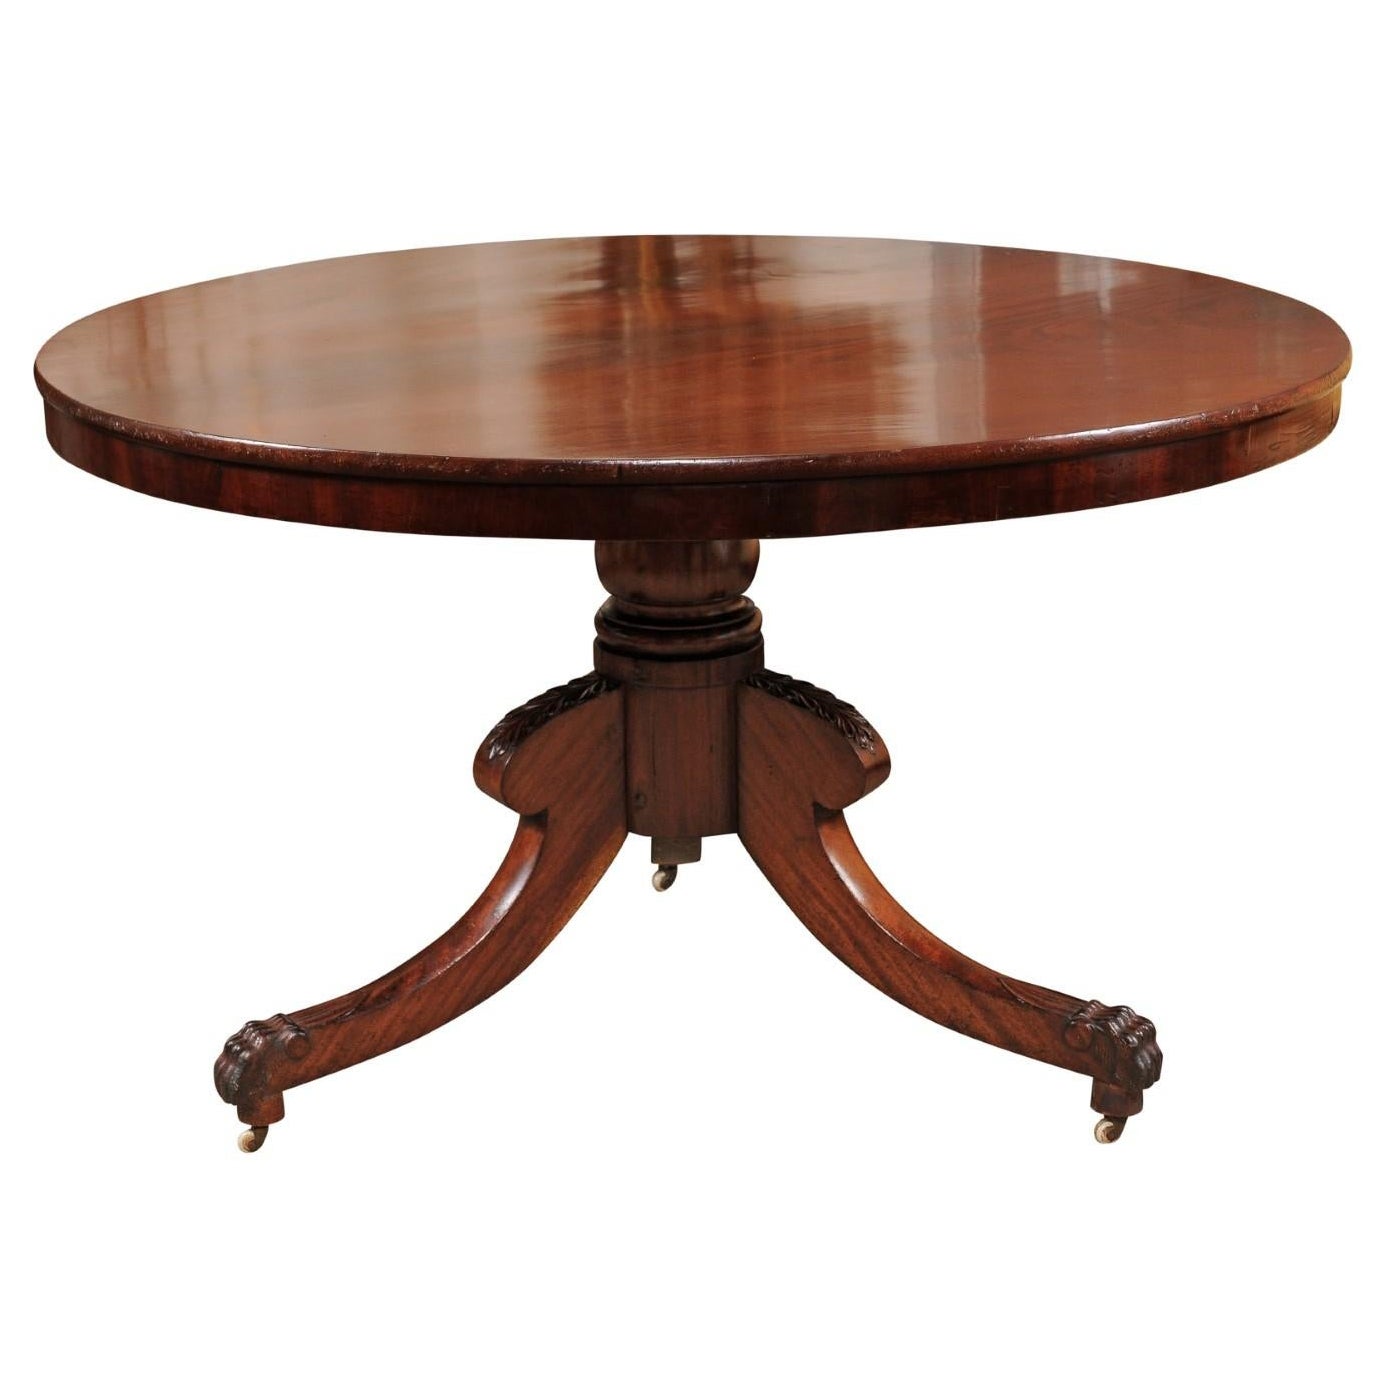 19th Century English Mahogany Center Table with Pedestal Base & 3 Splayed Legs 